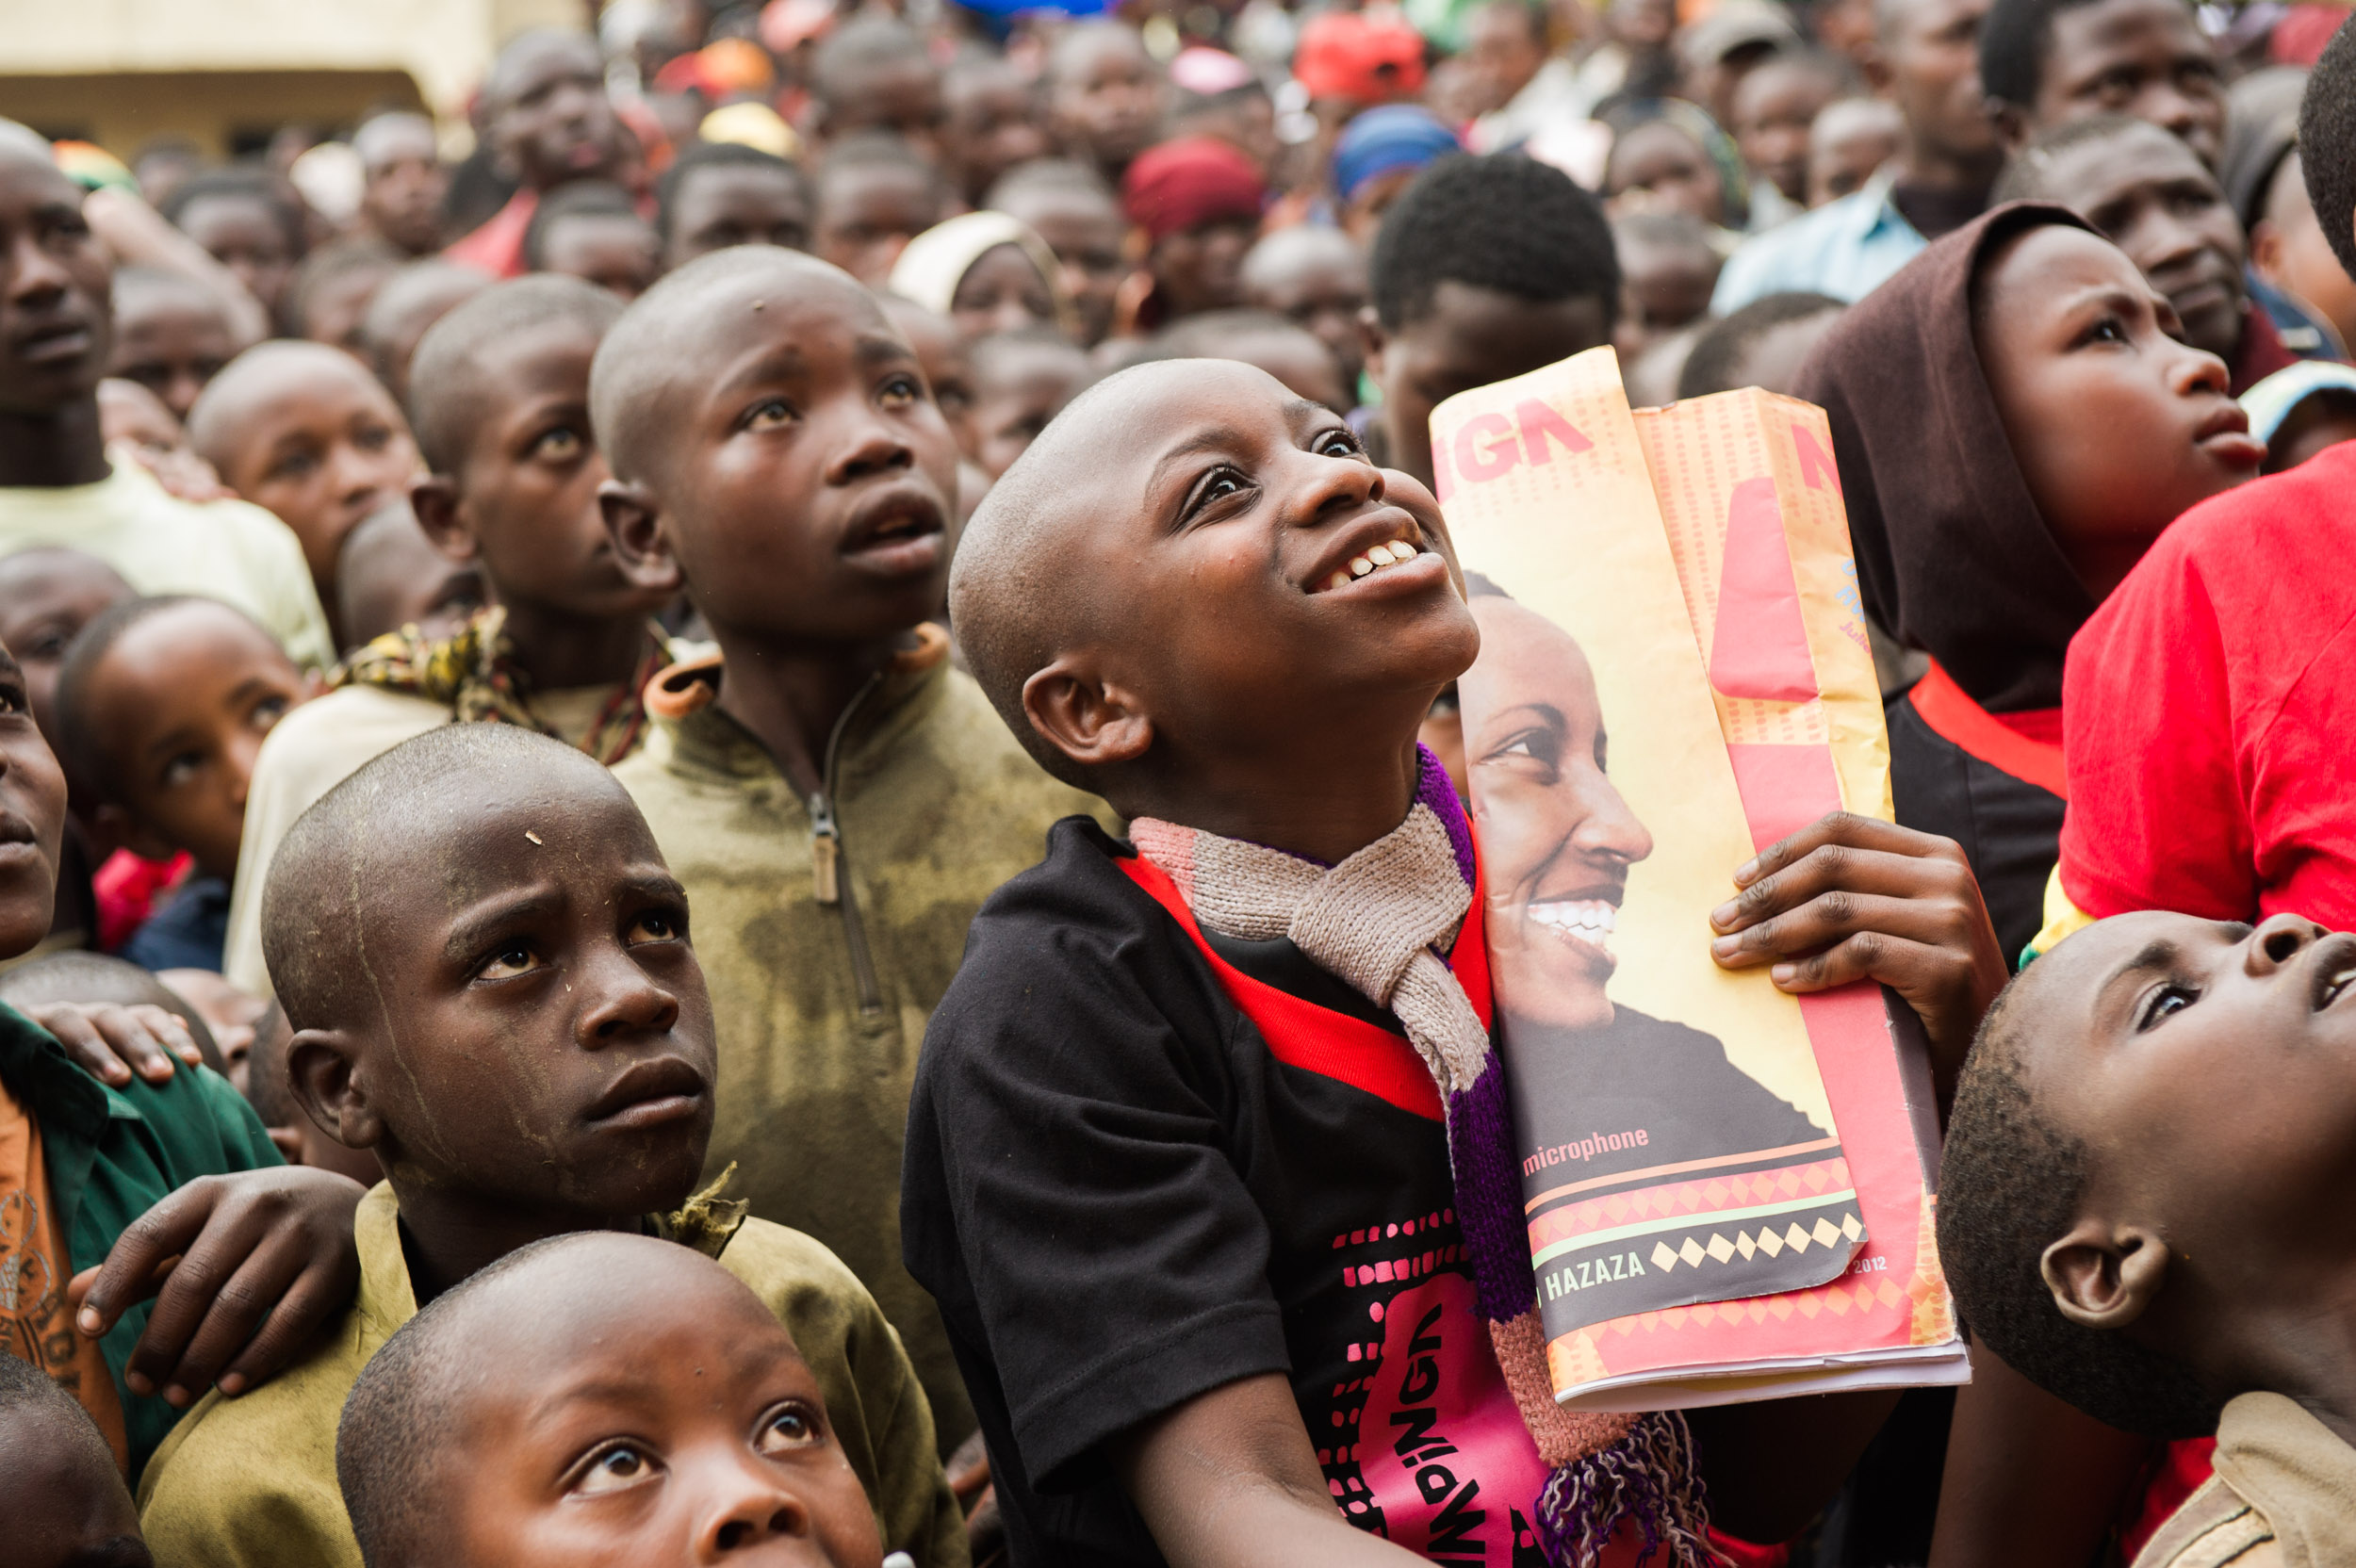  Girls look up at the stage during the distribution of Nike Foundation's magazine Ni Nyampinga, a part of the country's first girls' movement called the Girl Effect.&nbsp; 